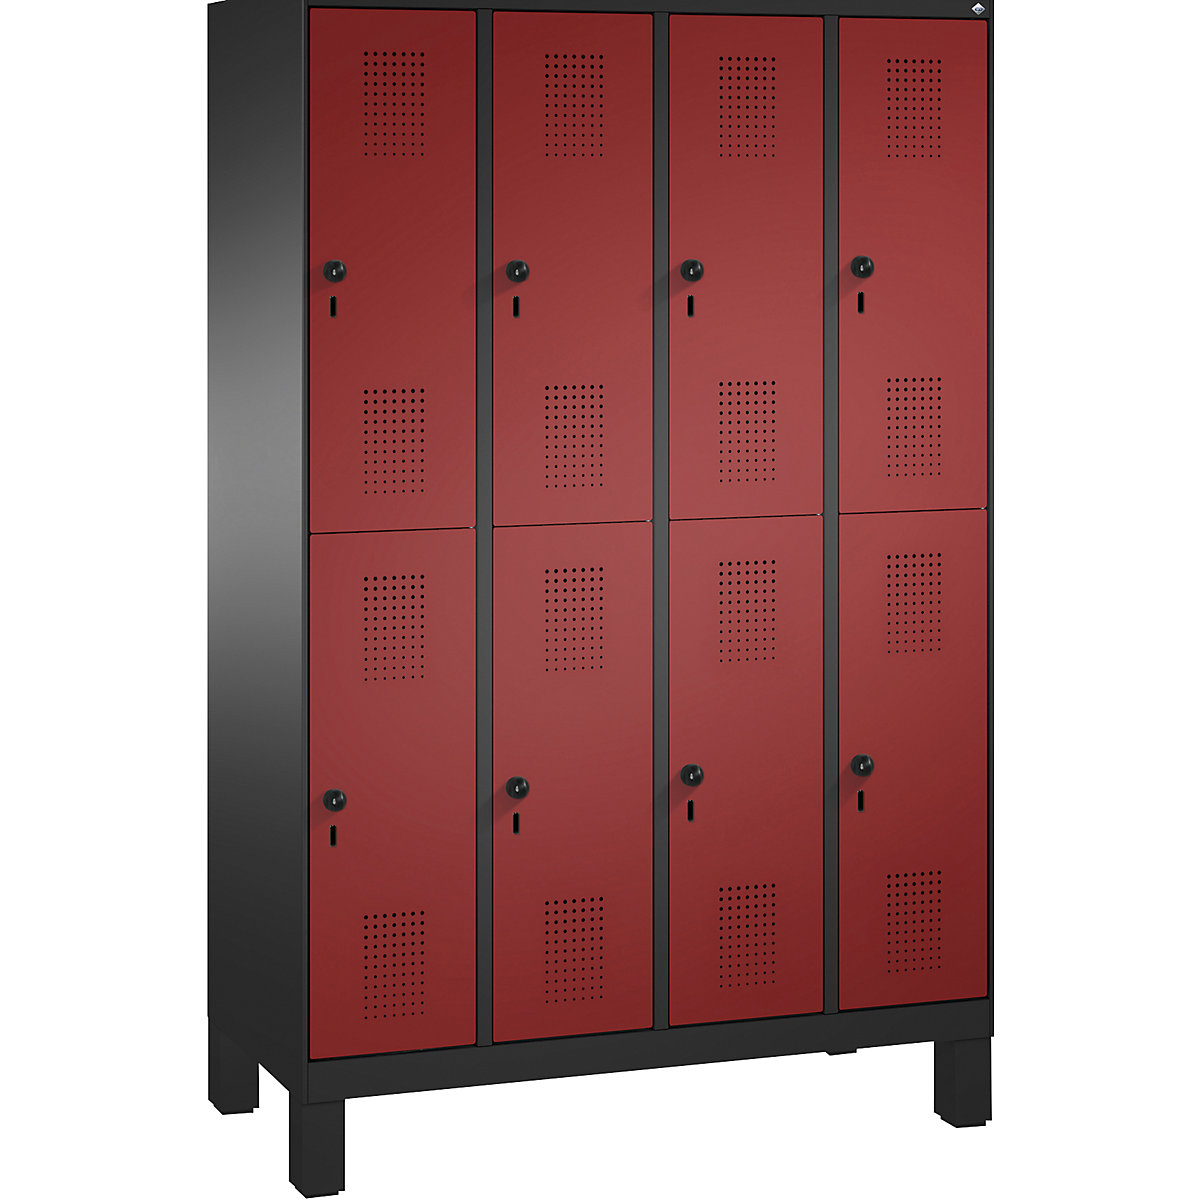 EVOLO cloakroom locker, double tier, with feet – C+P, 4 compartments, 2 shelf compartments each, compartment width 300 mm, black grey / ruby red-4